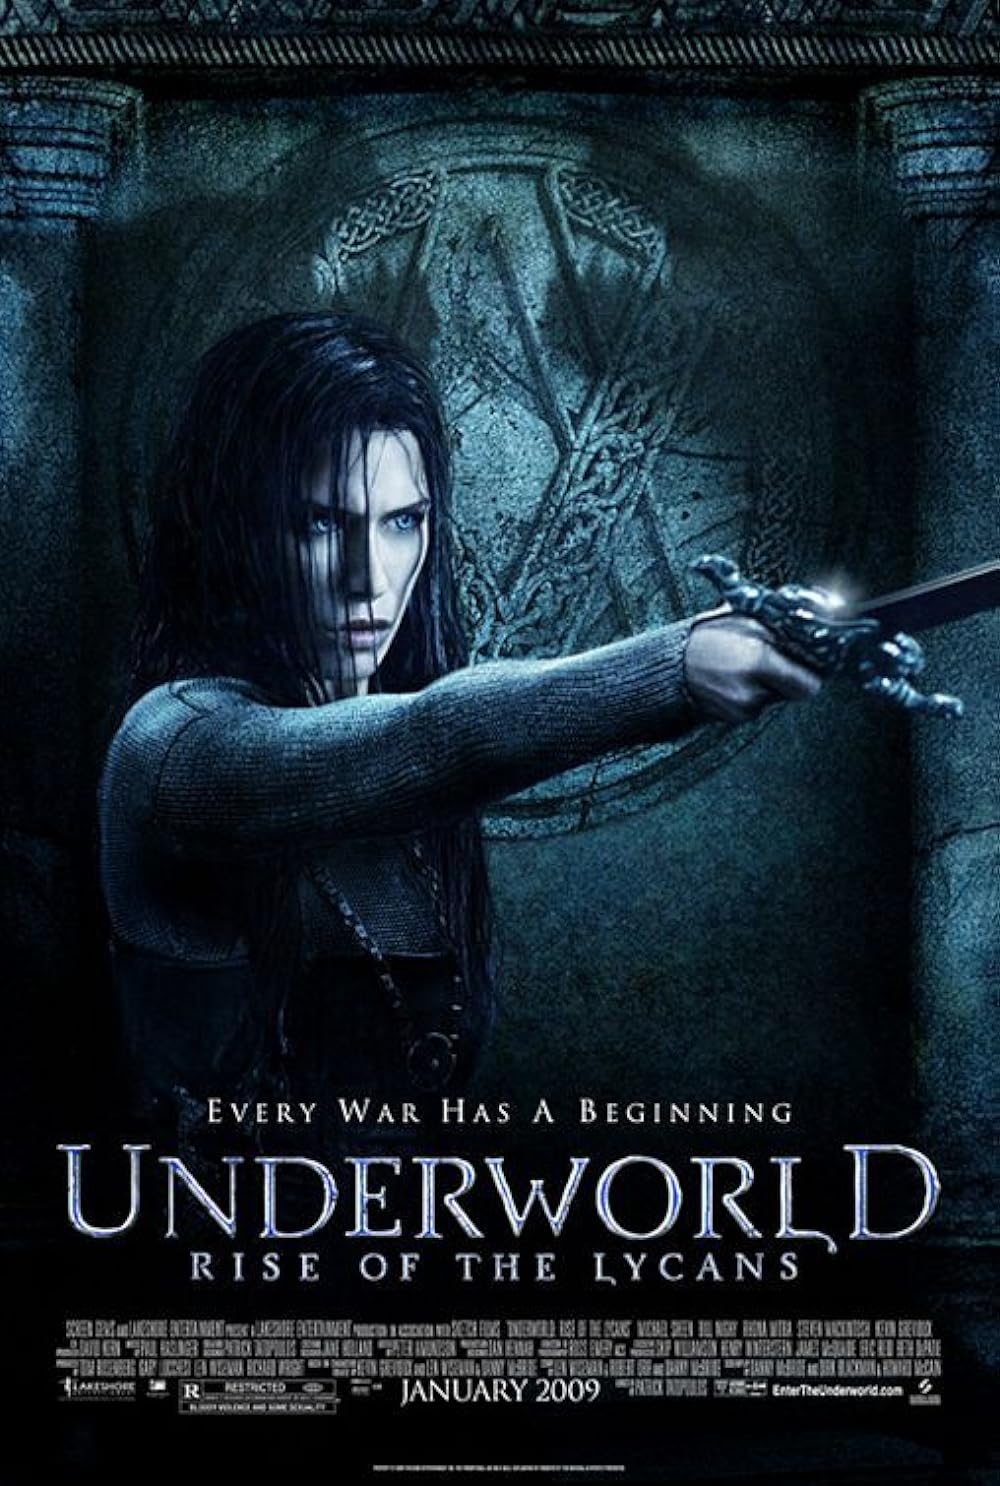 Underworld Rise of the Lycans (2009) 1080p BluRay Hindi ORG Dual Audio Movie ESubs [1.8GB]